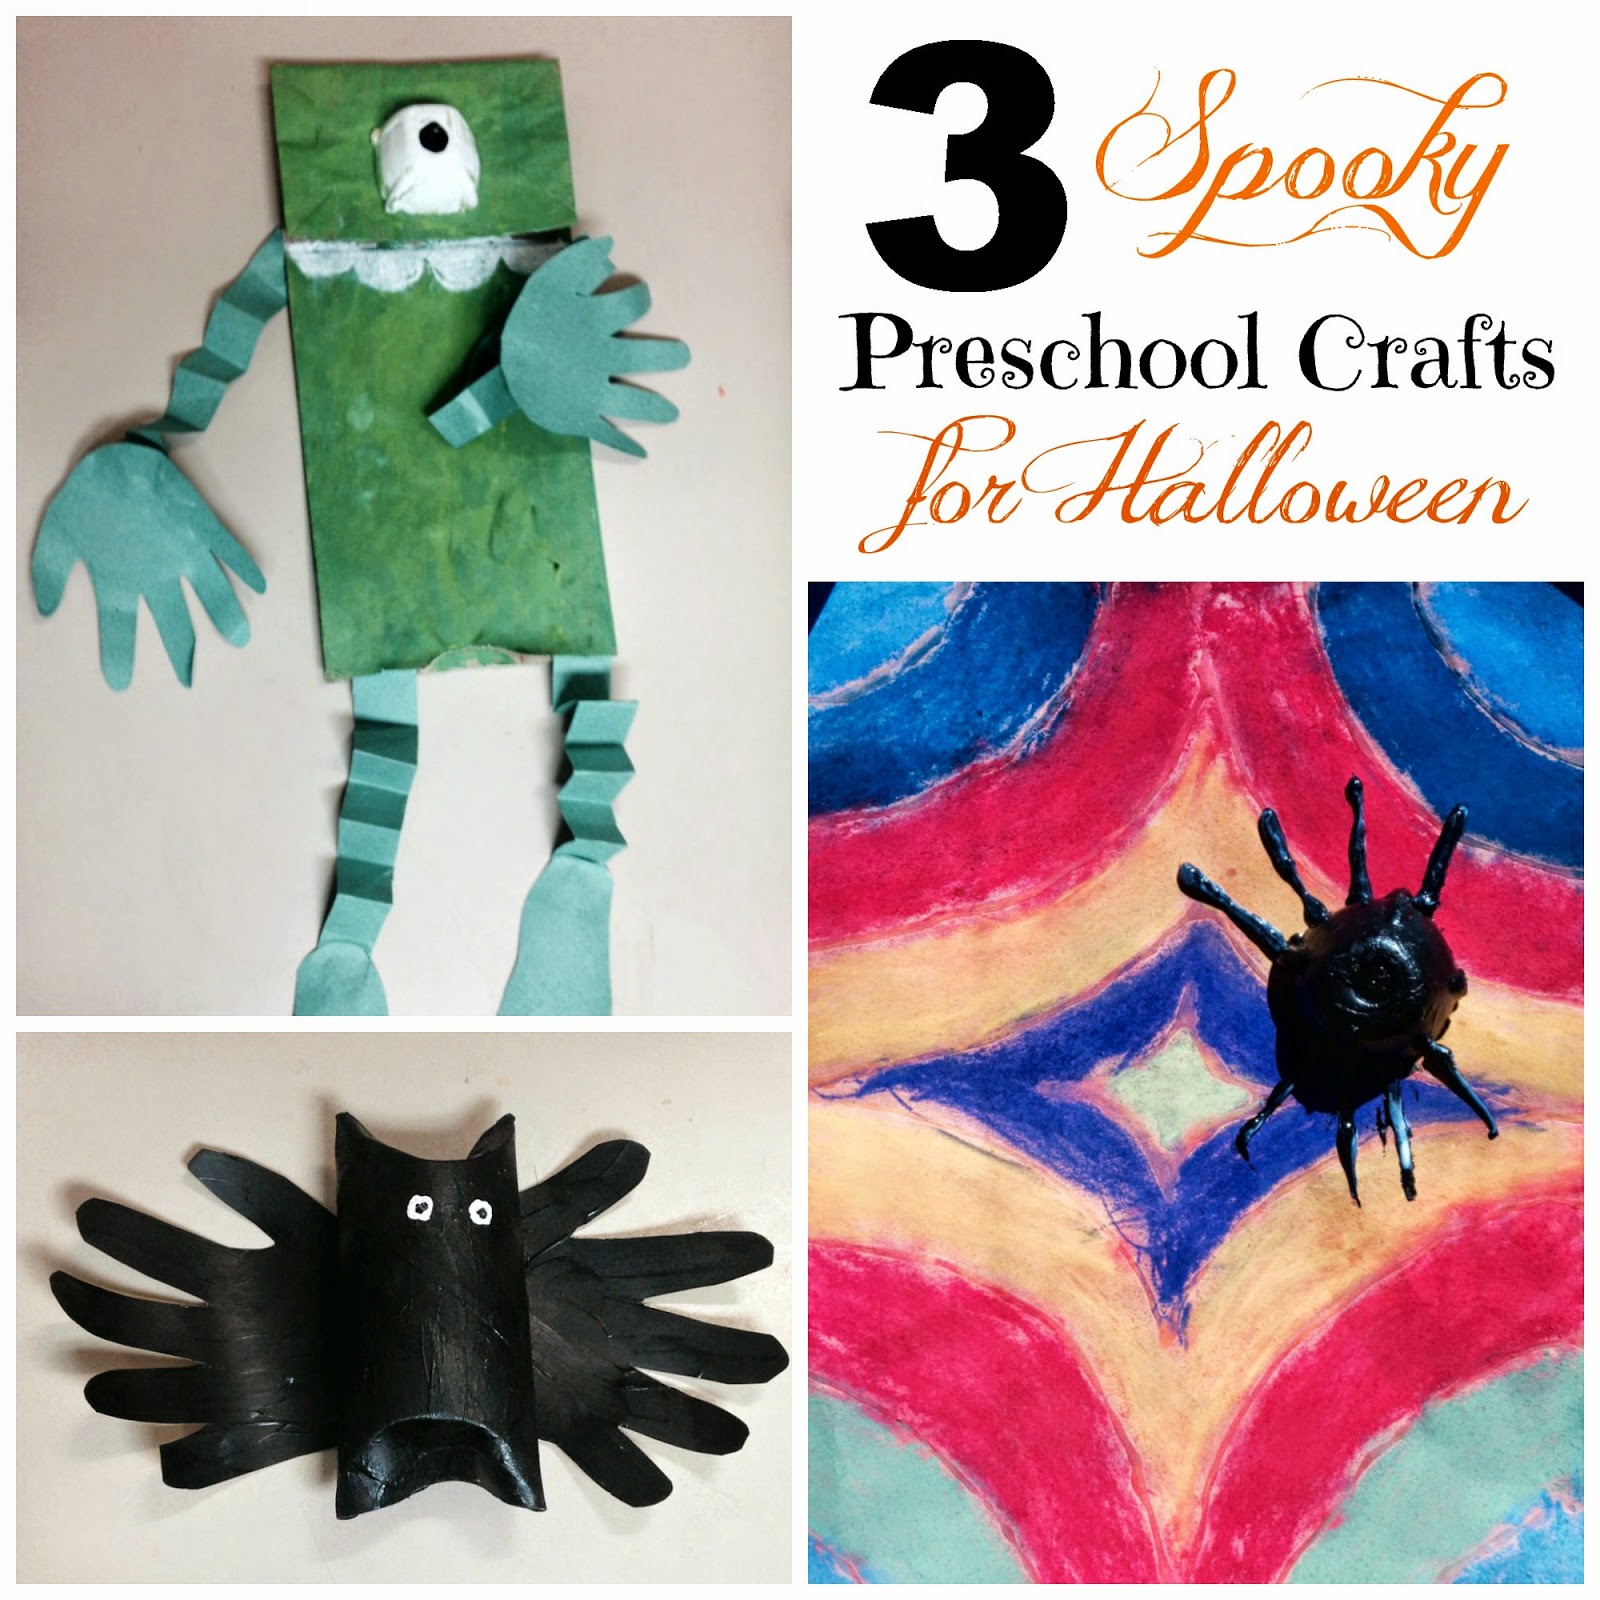 3 Spooky Preschool Crafts for Halloween - Outnumbered 3 to 1